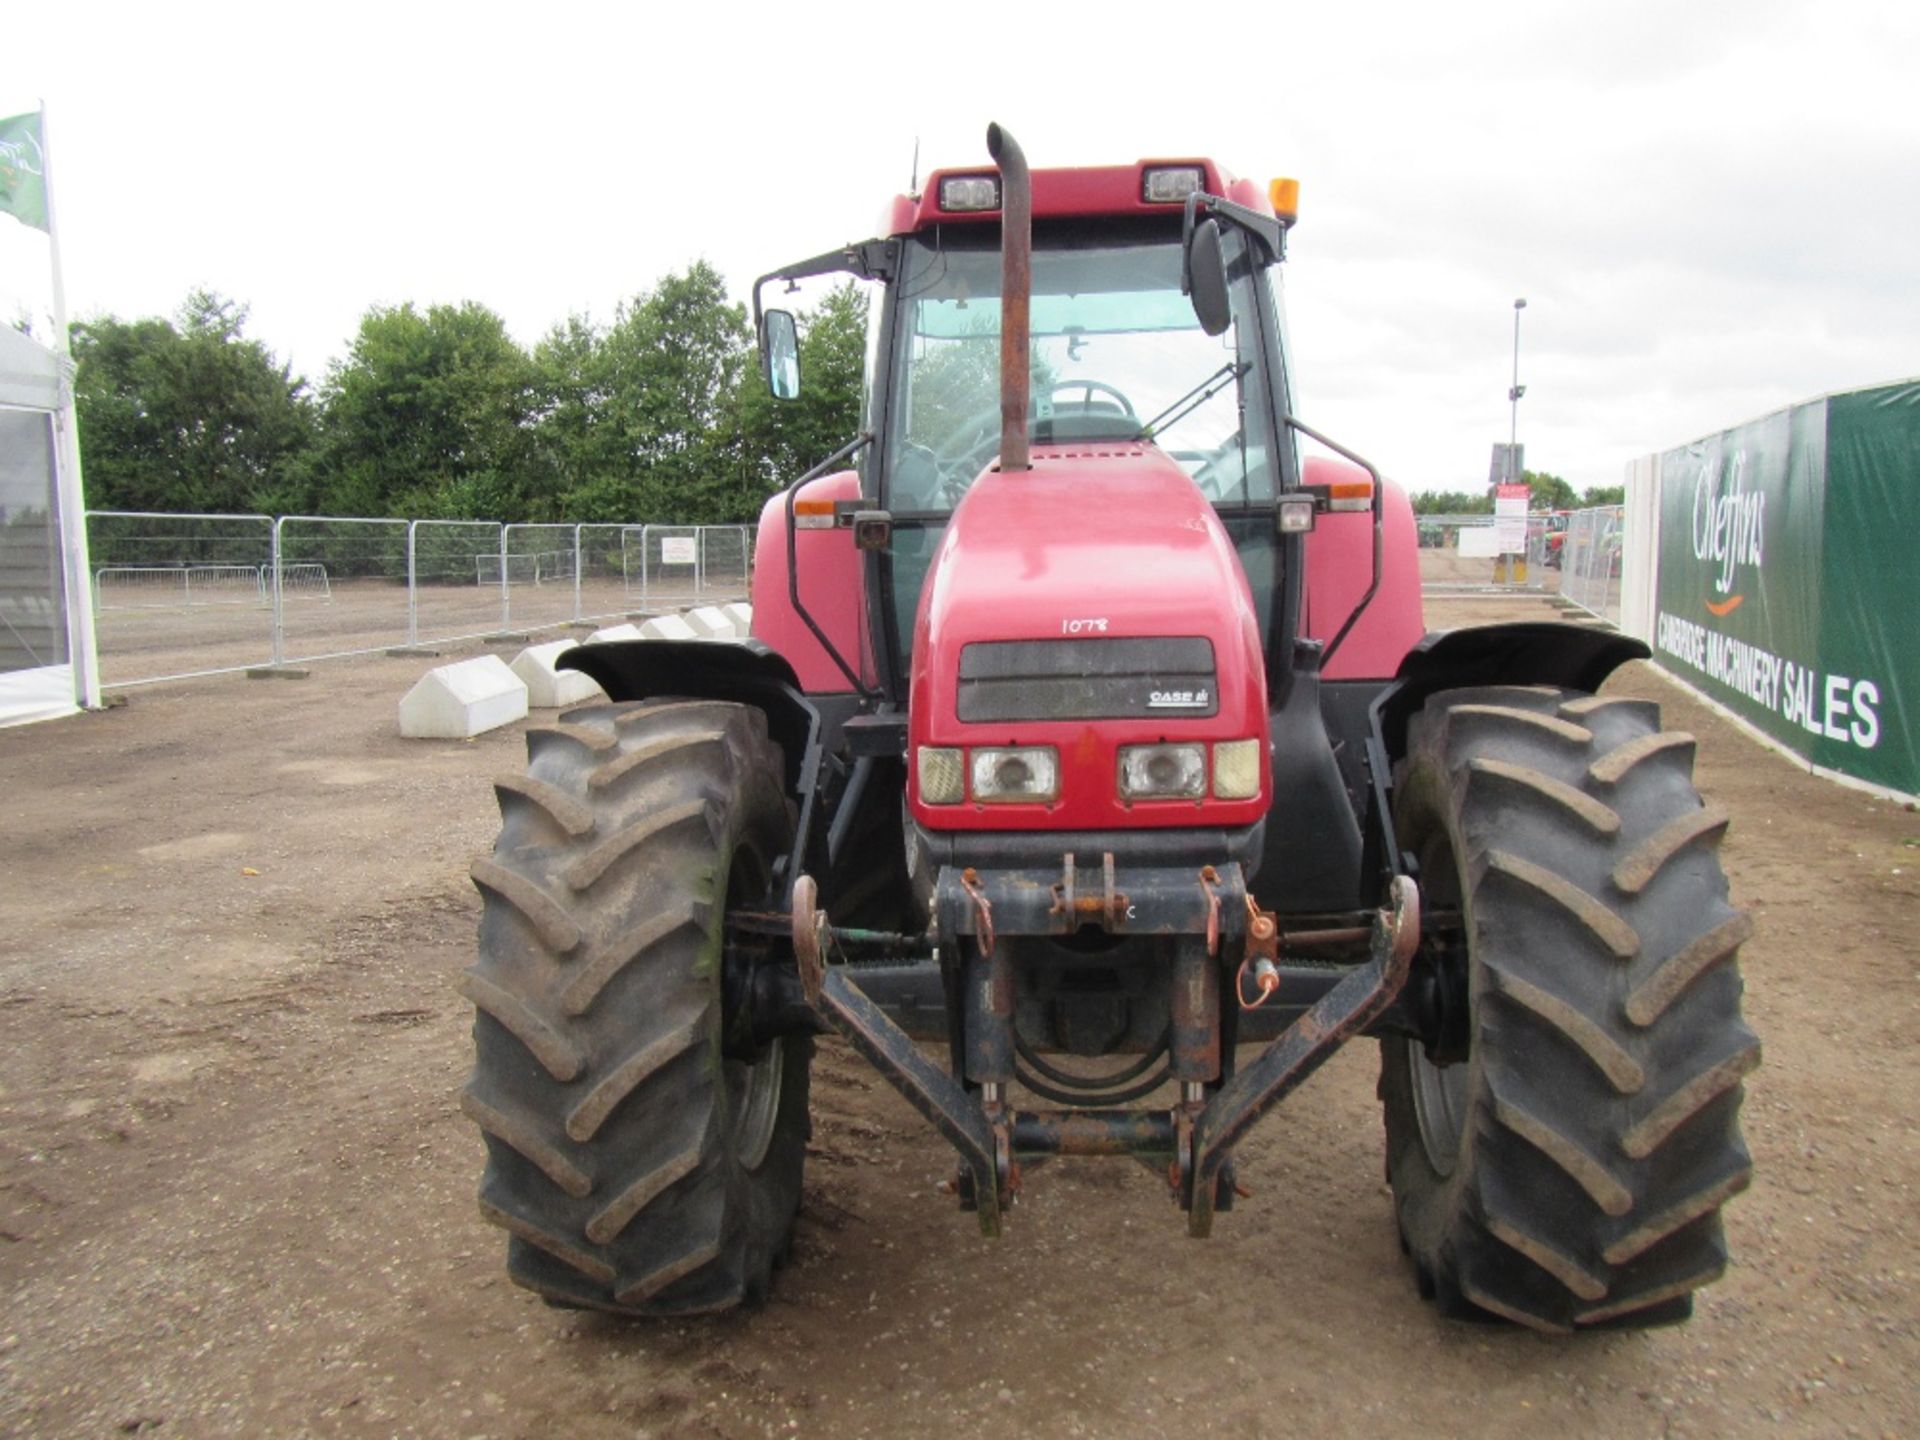 1998 Case CS150 Tractor 6700 hrs. Reg. No. R398 UHE - Image 2 of 17